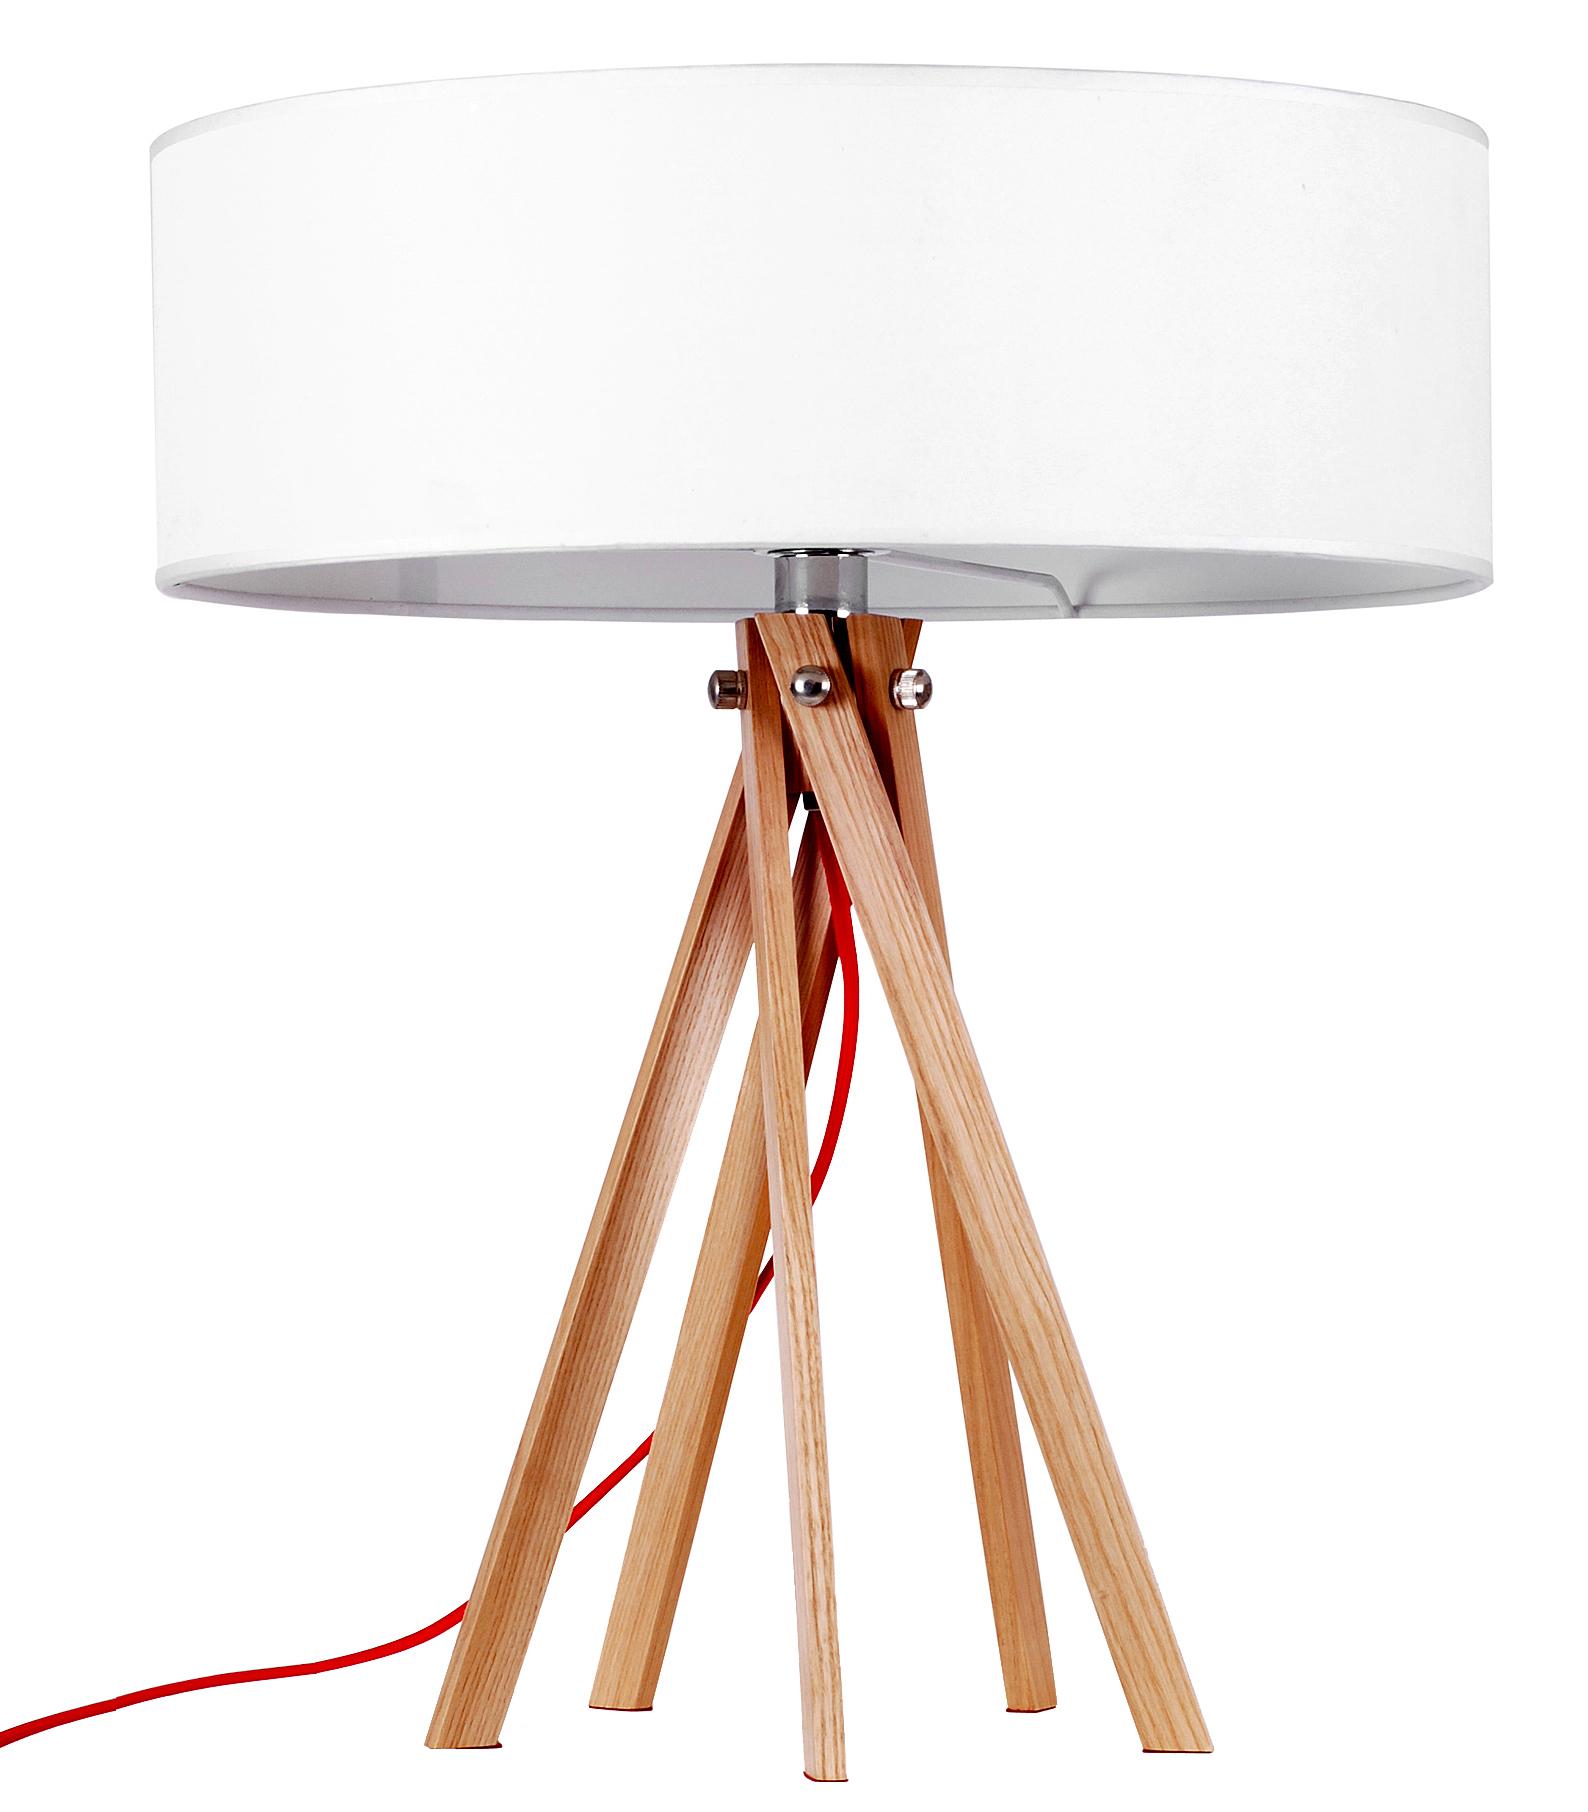 ADNOR timber table lamp